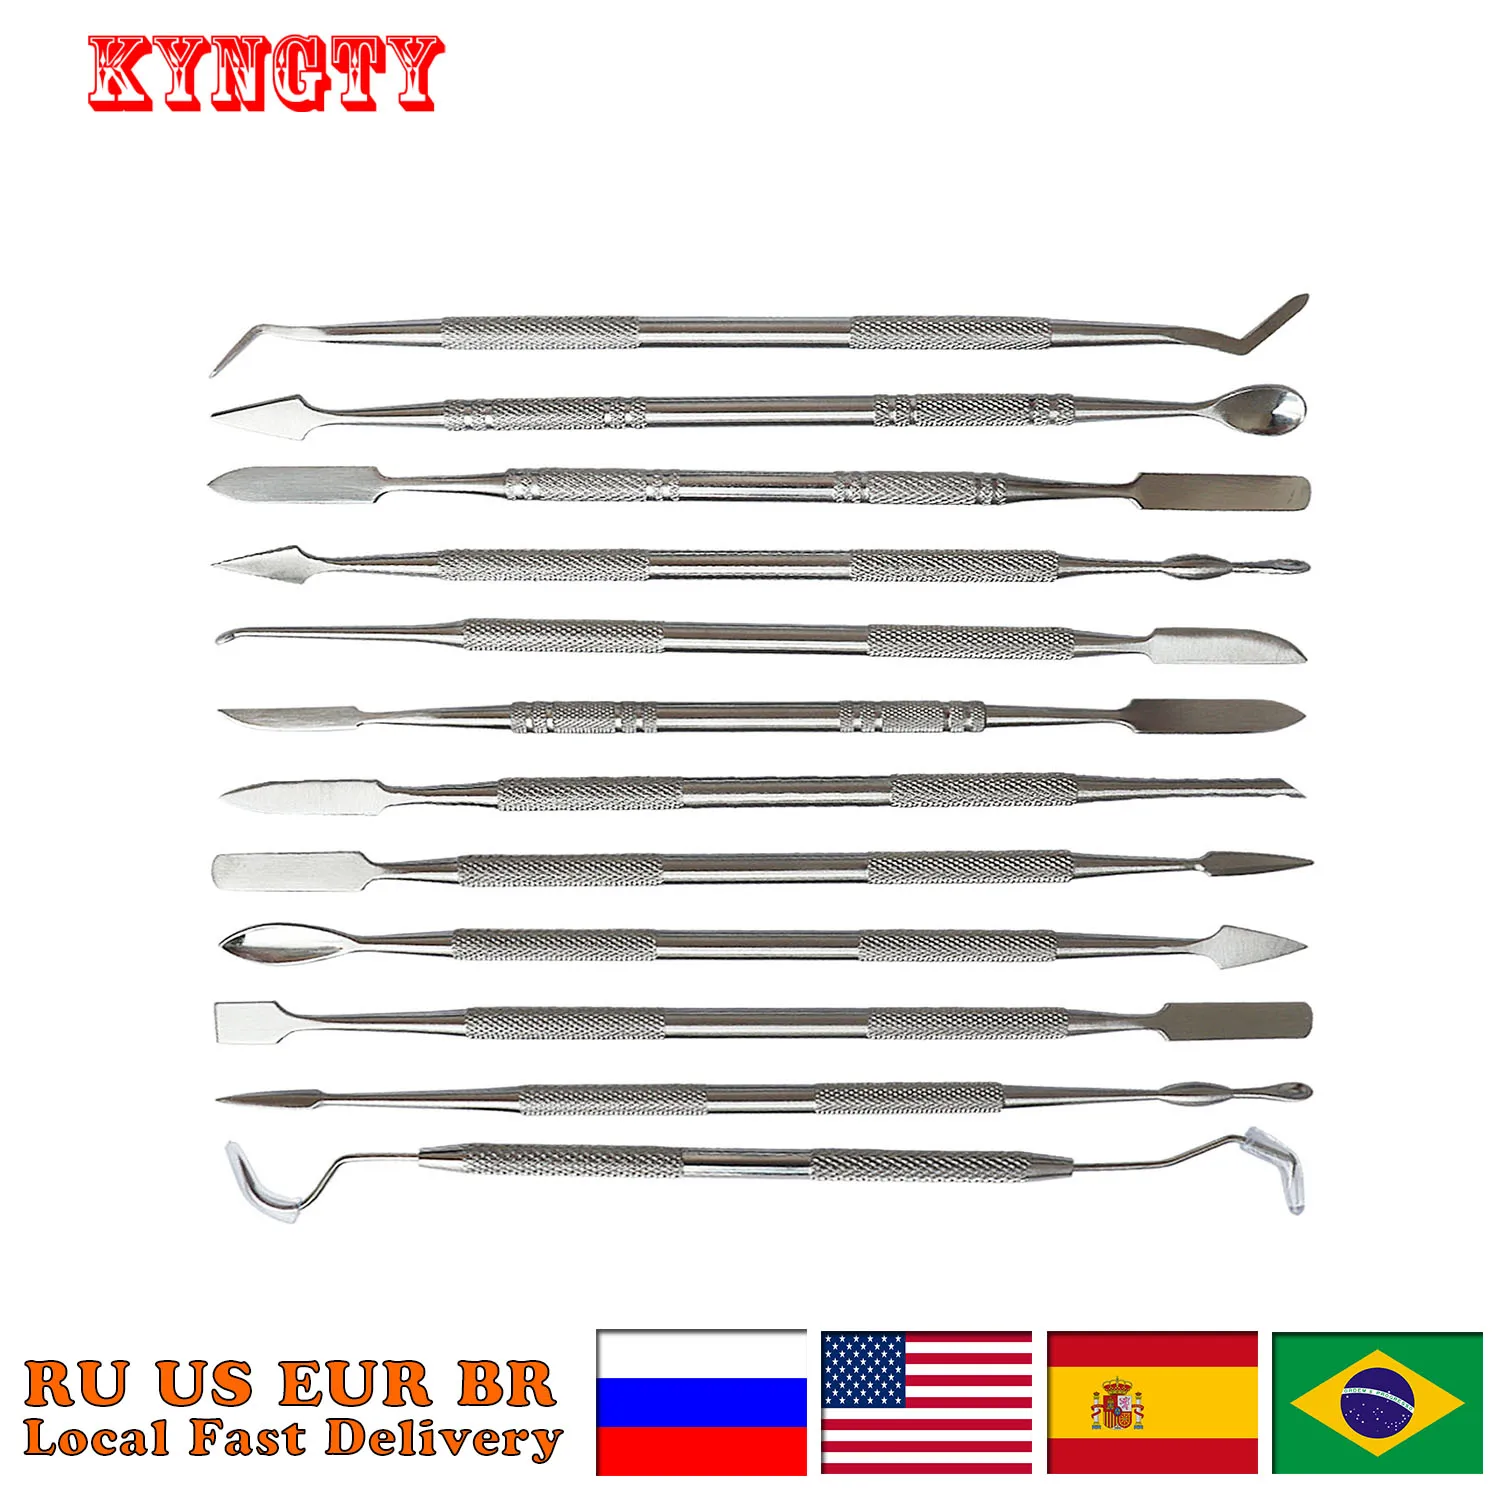 Stainless Steel Metal Spatula for Wax Knife Kit Sculpture Tools Blade Dental Knife Carve Pottery Clay Carving Modeling Jewelry 4pcs dotting modeling ball tools double ended 8 ball stainless steel clay ceramics pottery carving embossing sculpting tools